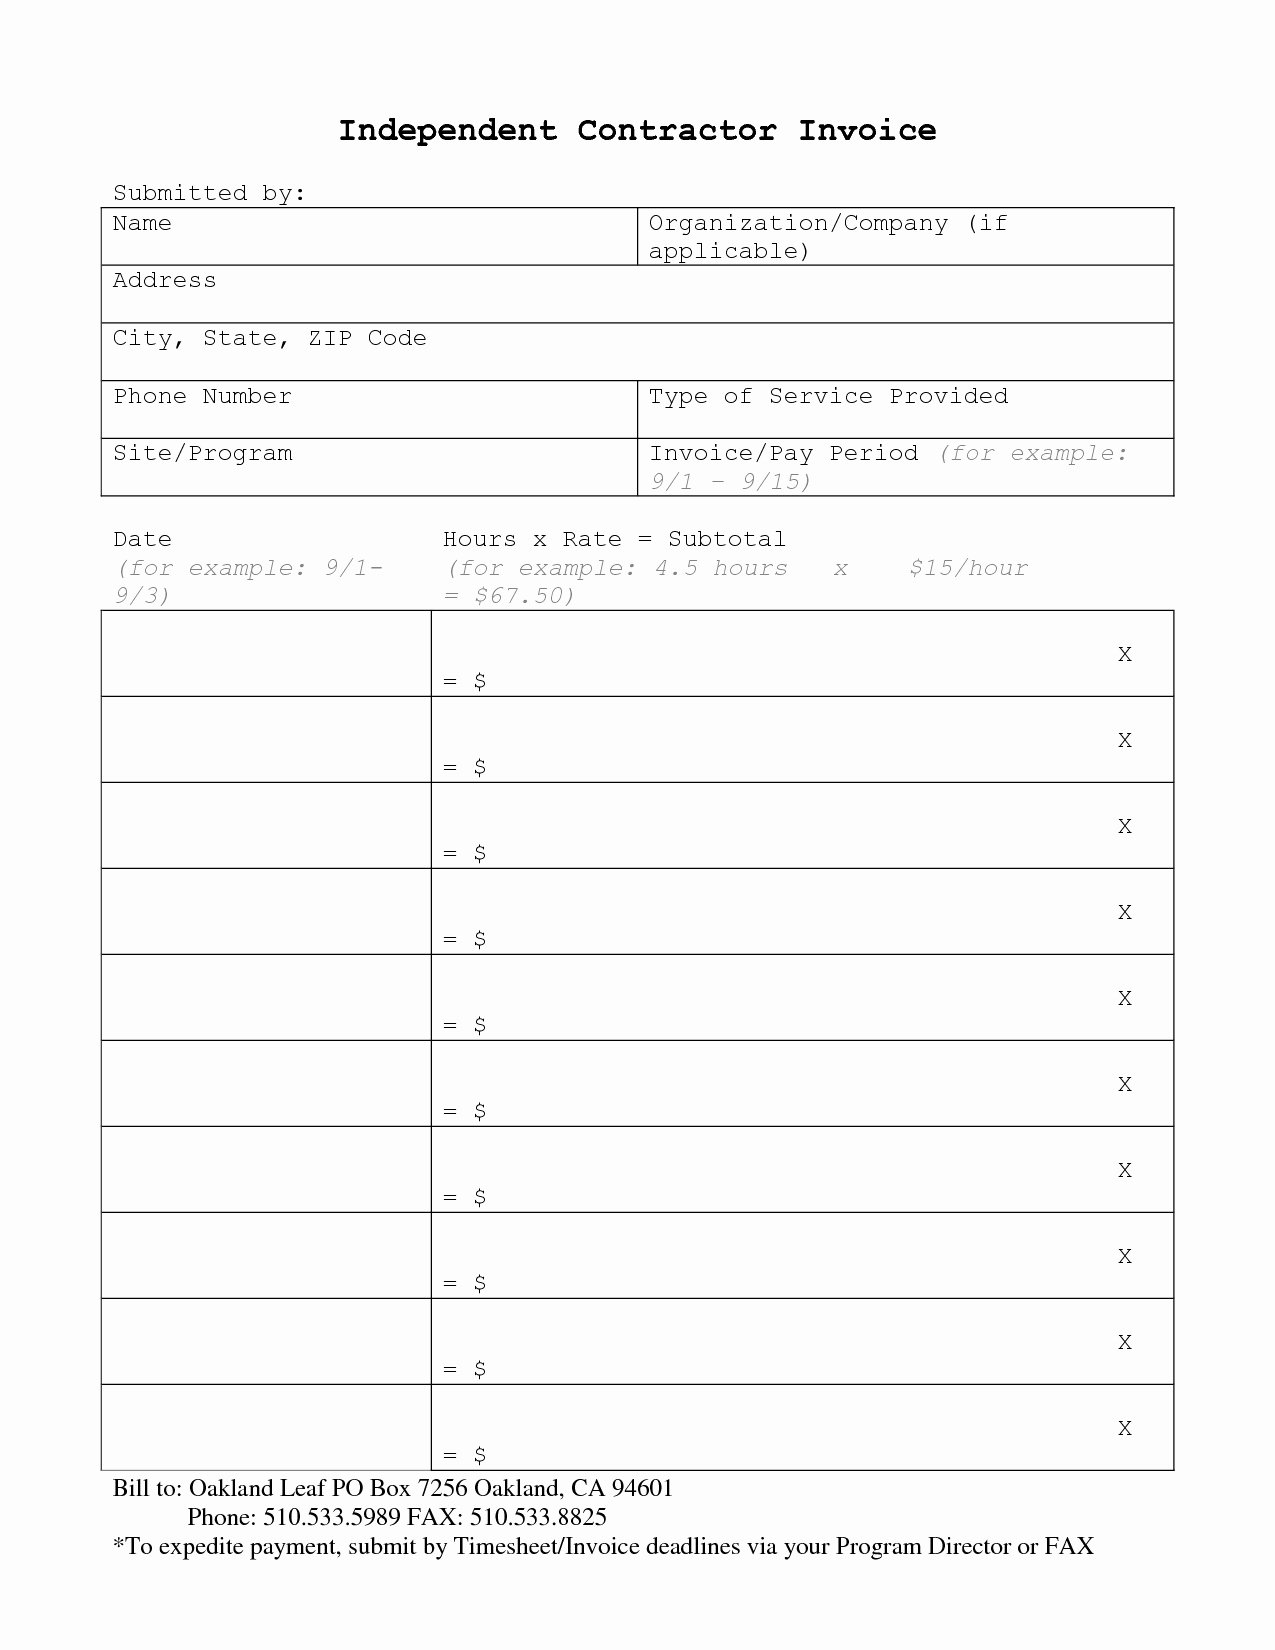 Independent Contractor Billing Template New Independent Contractor Invoice Invoice Template Ideas